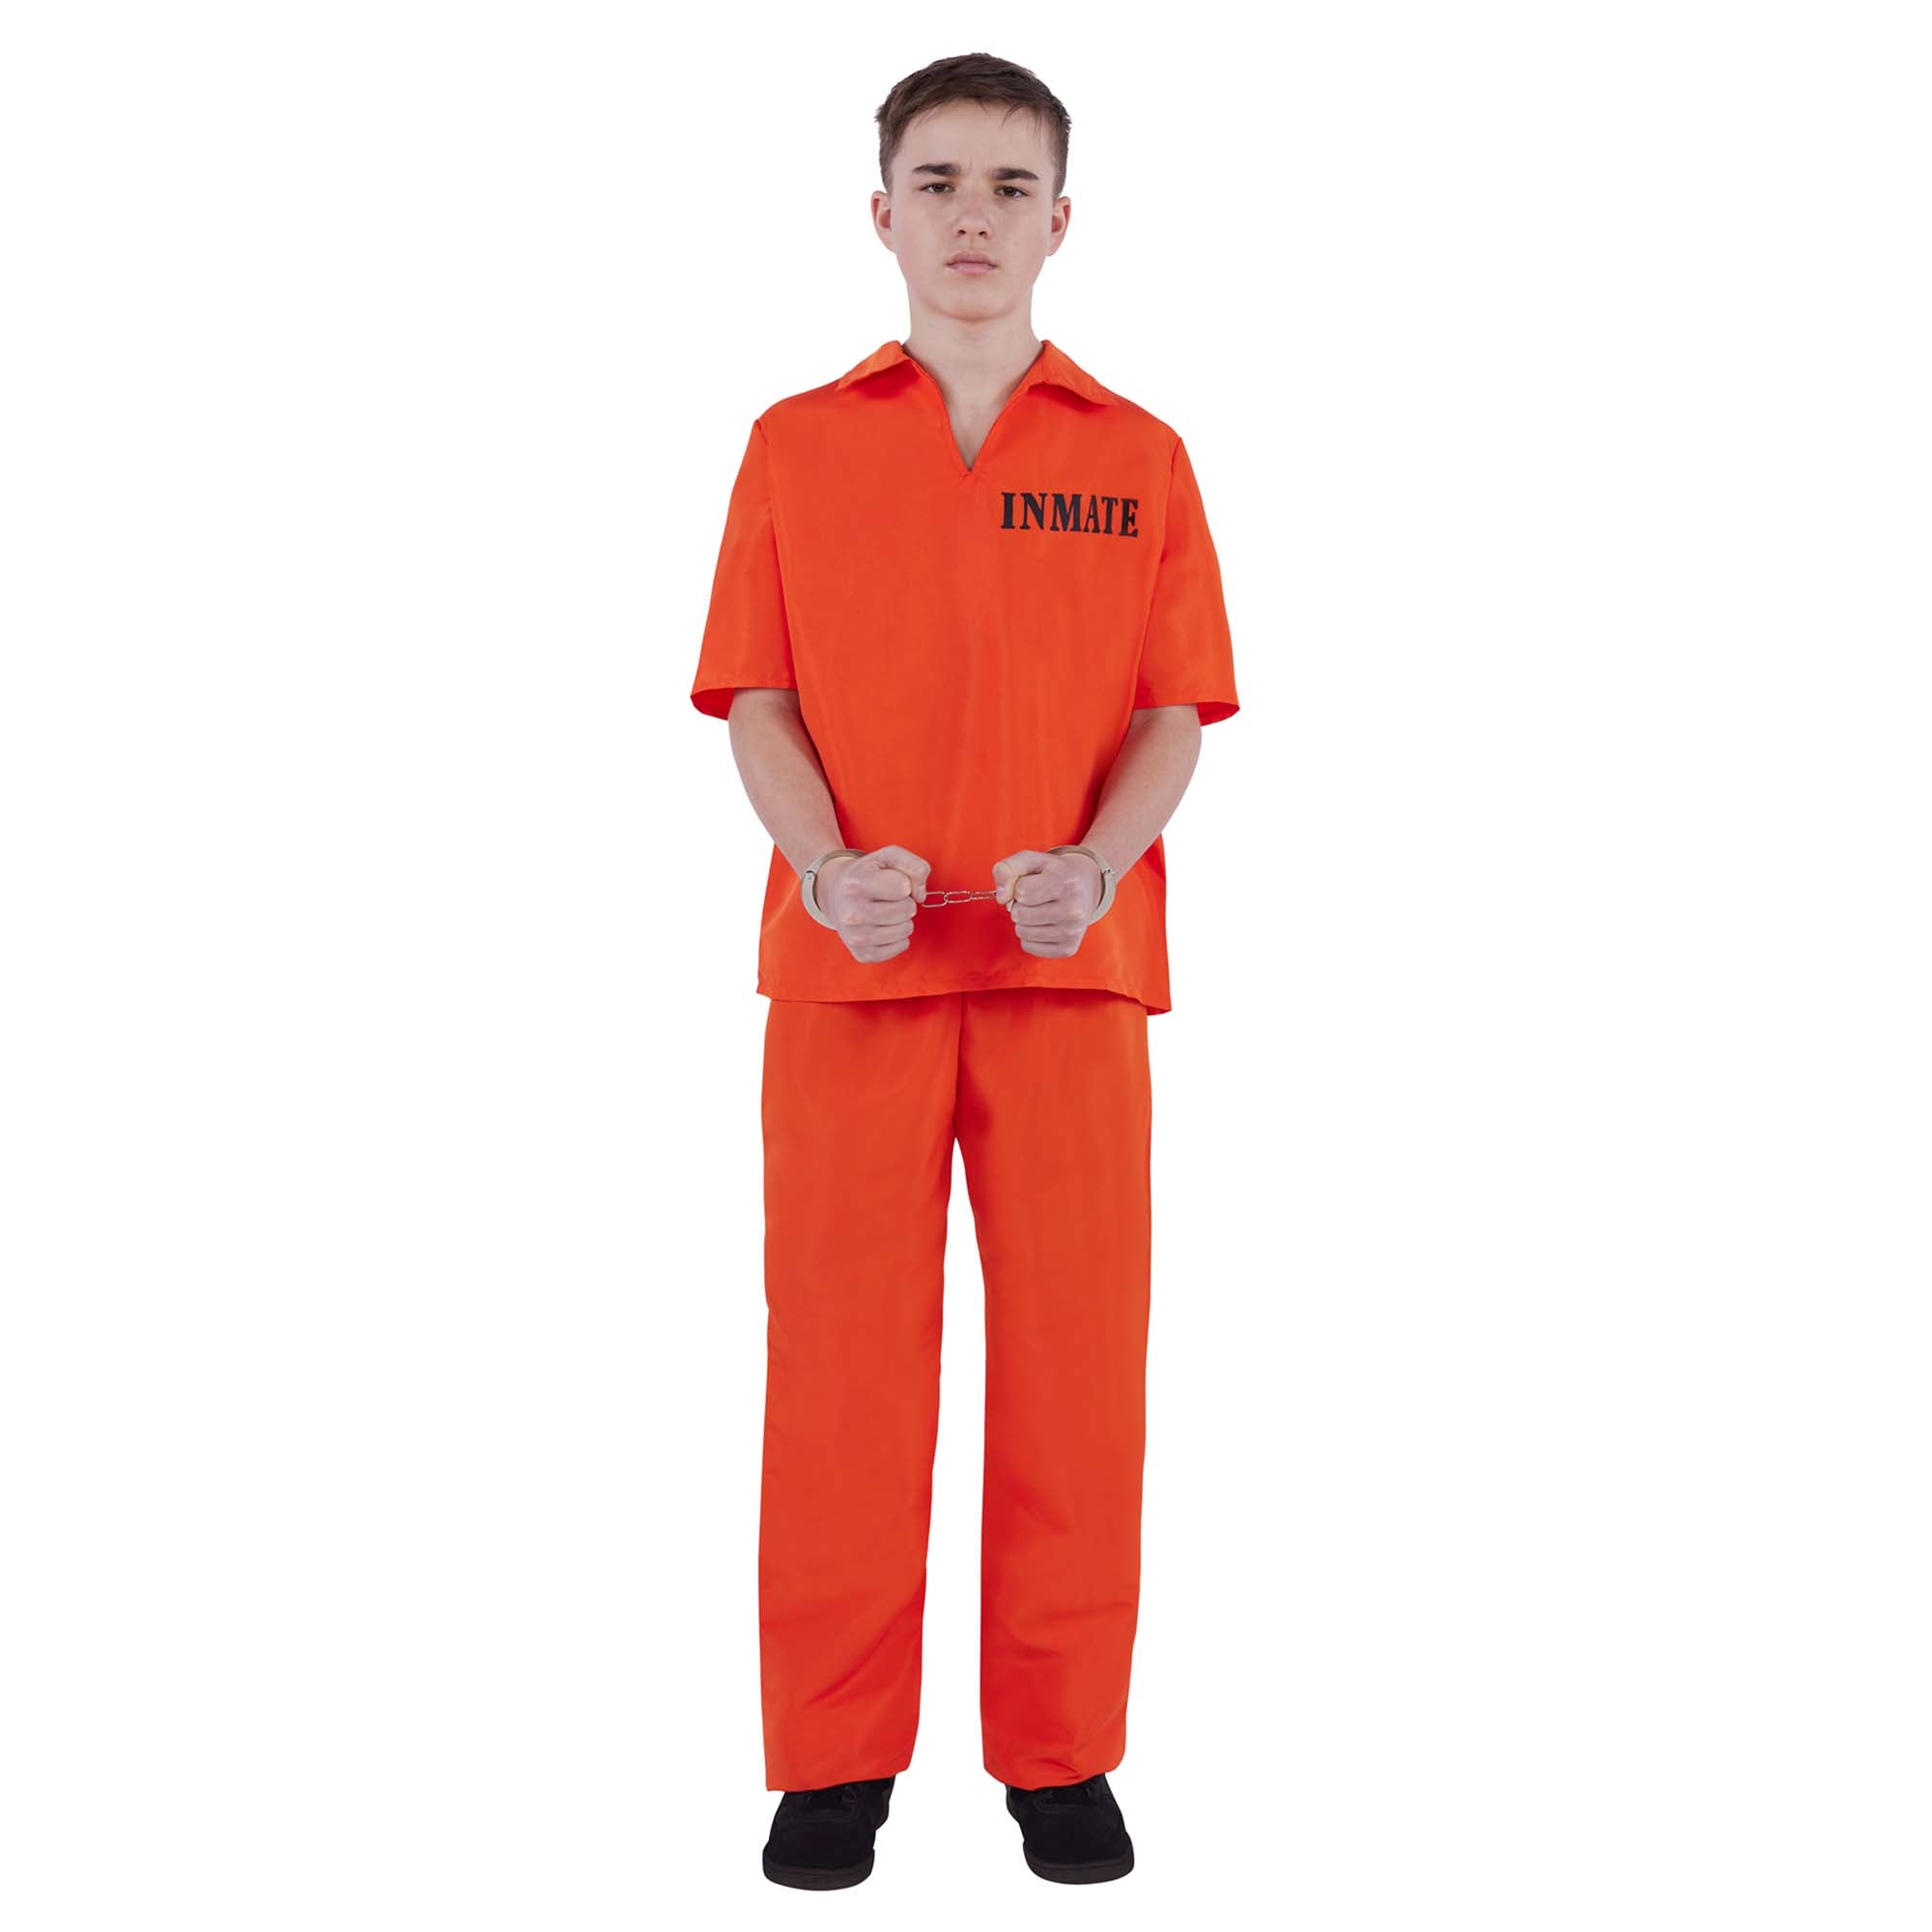 Inmate Costume for Kids, Orange Top and Pants | Party Expert